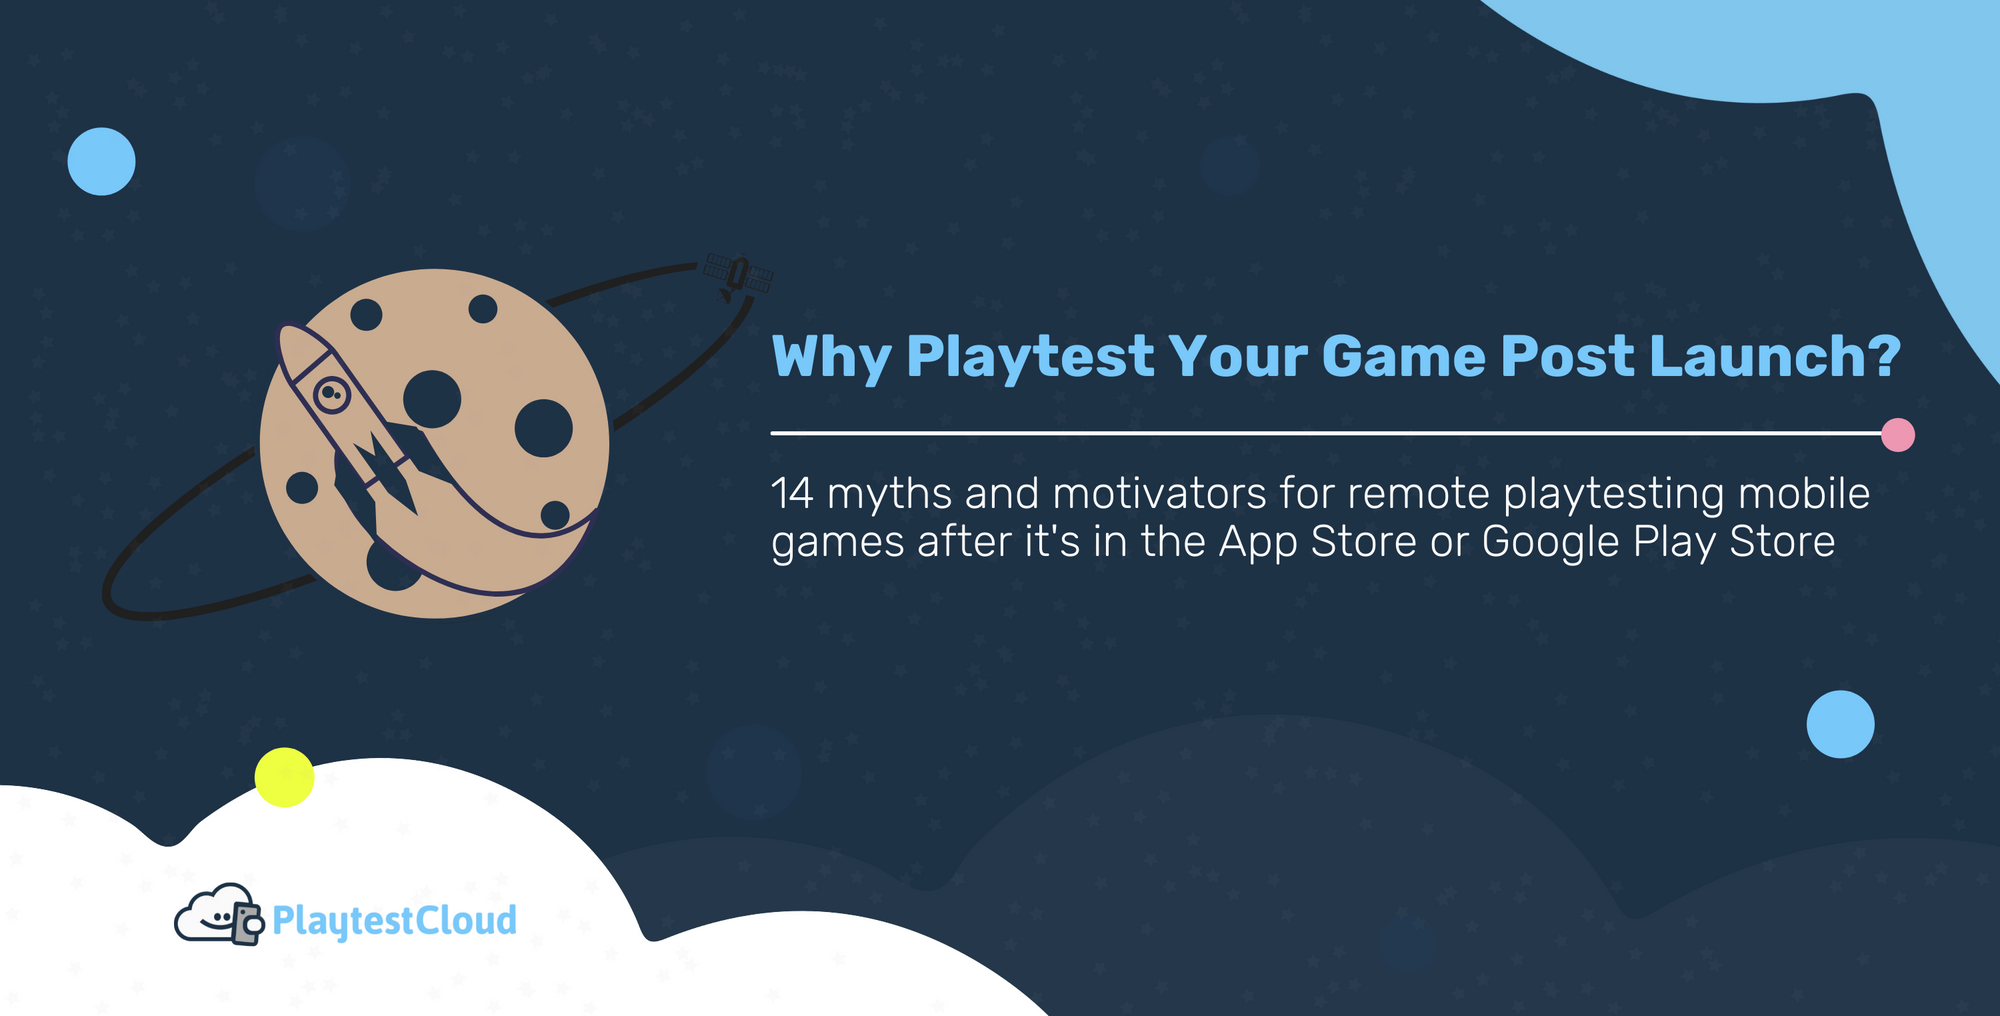 Why Playtest Your Game Post Launch?